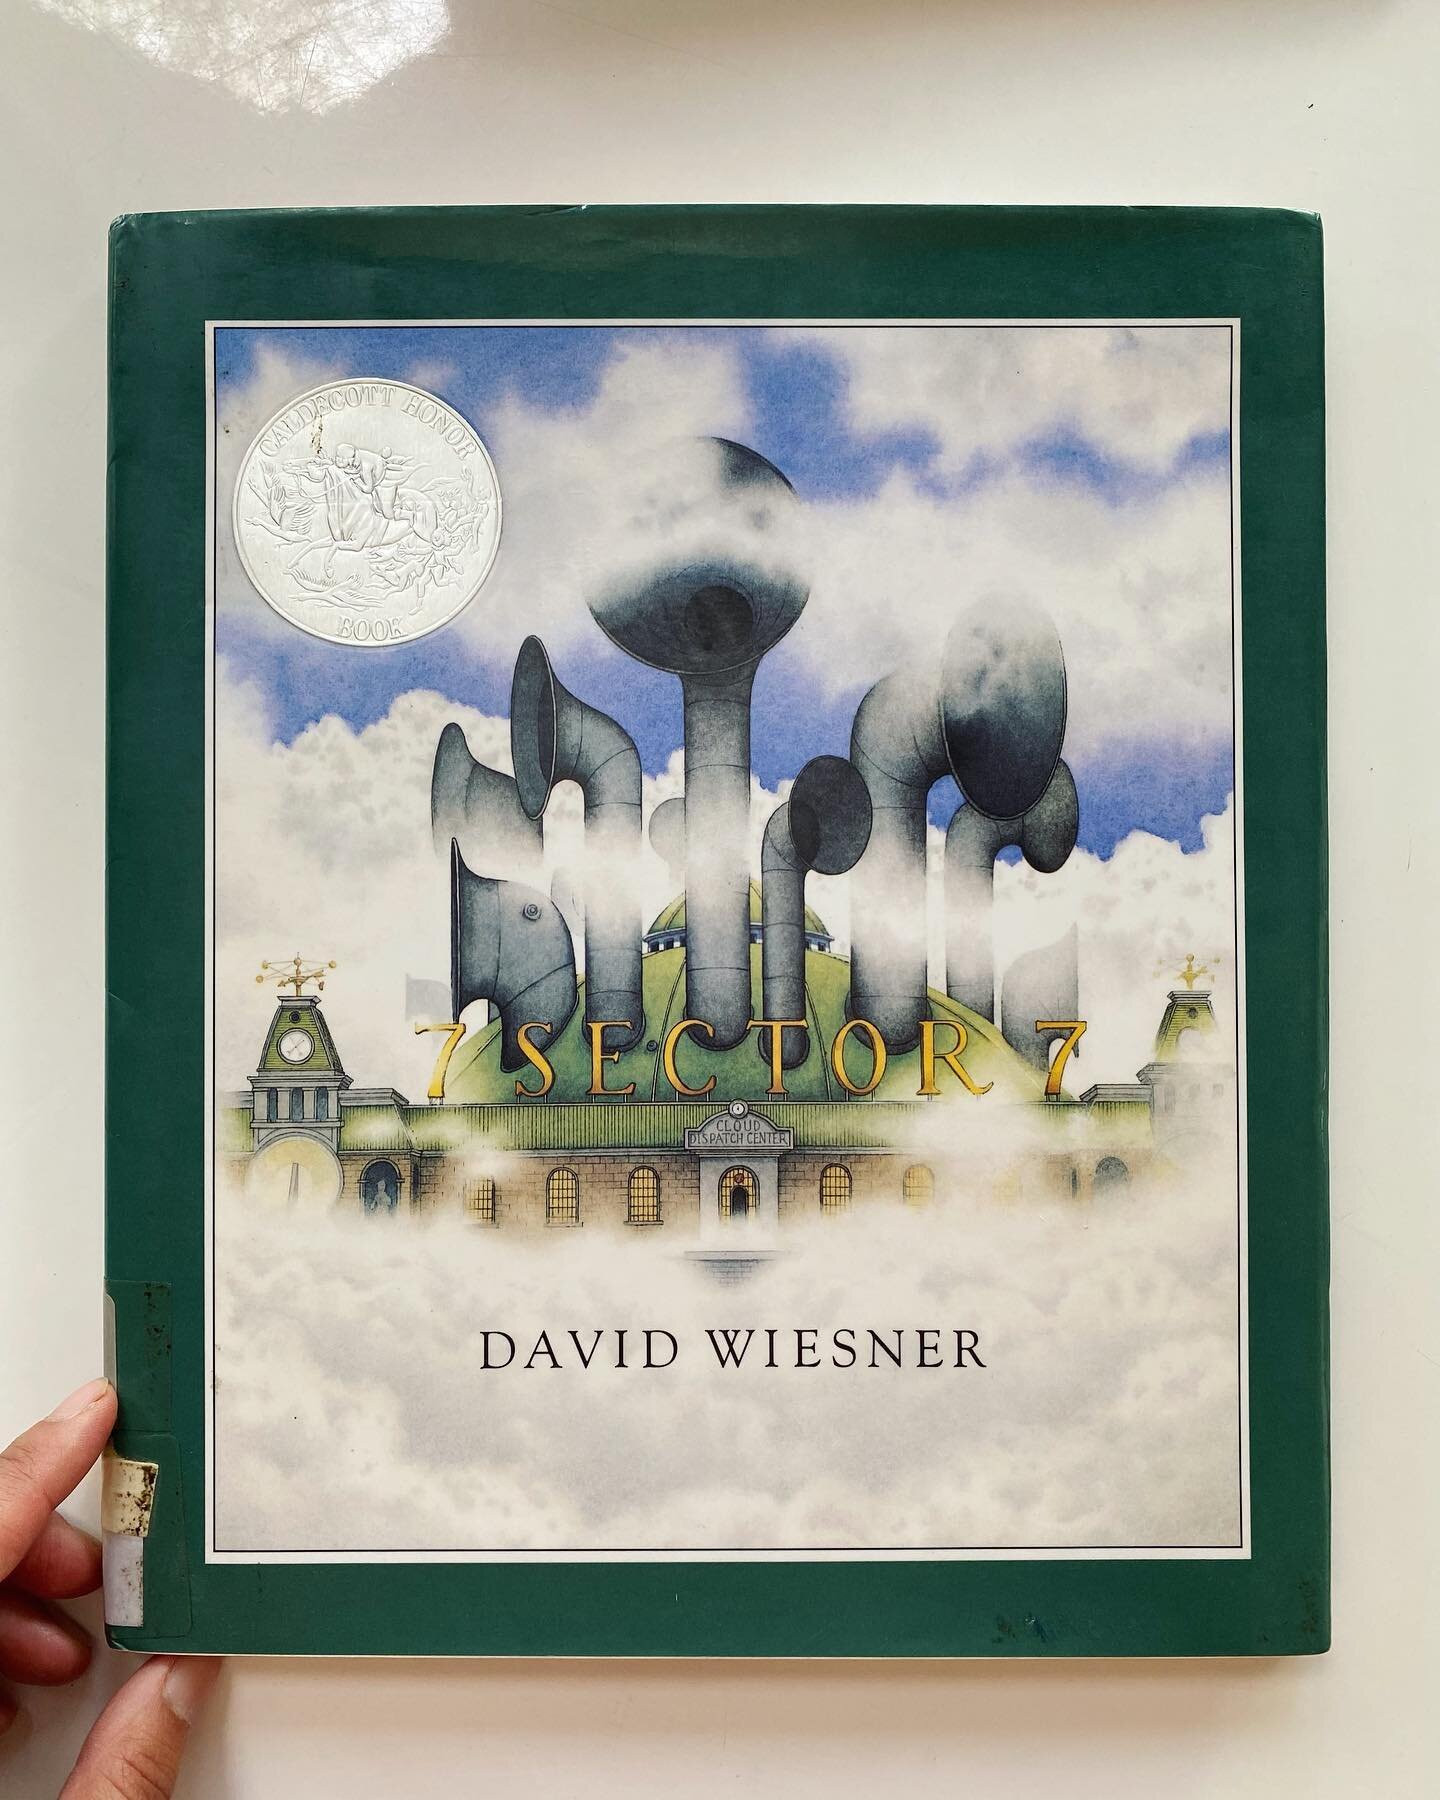 The cover of another David Wiesner book, Tuesday, which won the Caldecott Medal in 1991, is seared into my childhood memory with its glowing clock tower. Wiesner would go onto win two other Caldecott medals, including one for illustrating Sector 7 in